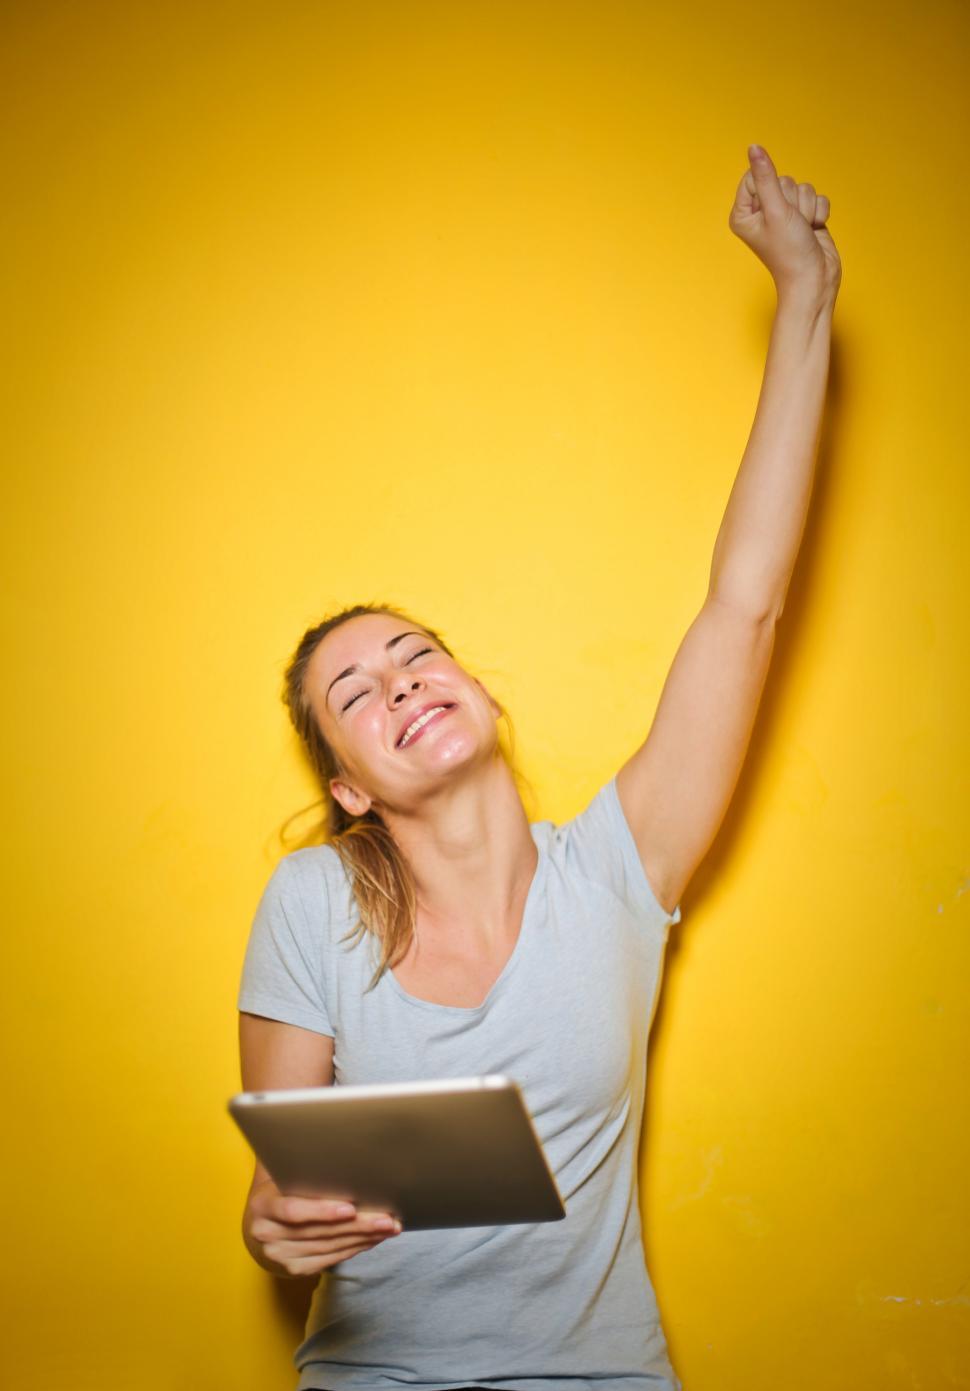 Free Image of Young Happy Woman Holding An iPad 